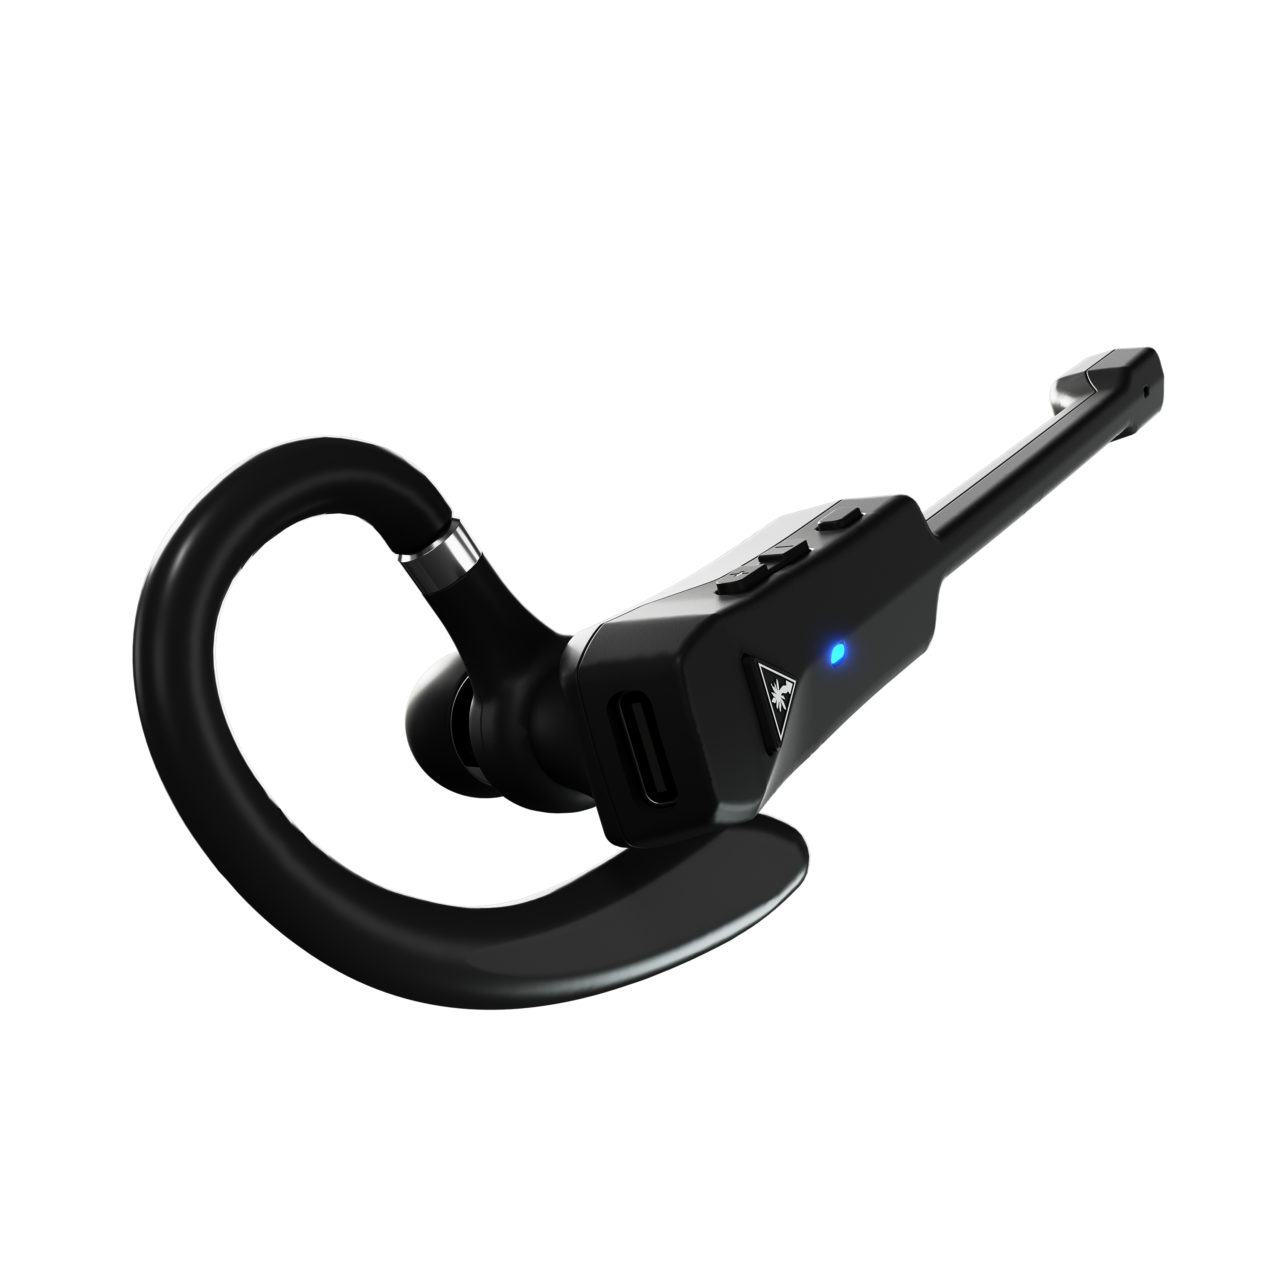 Recon Air product image (Turtle Beach)